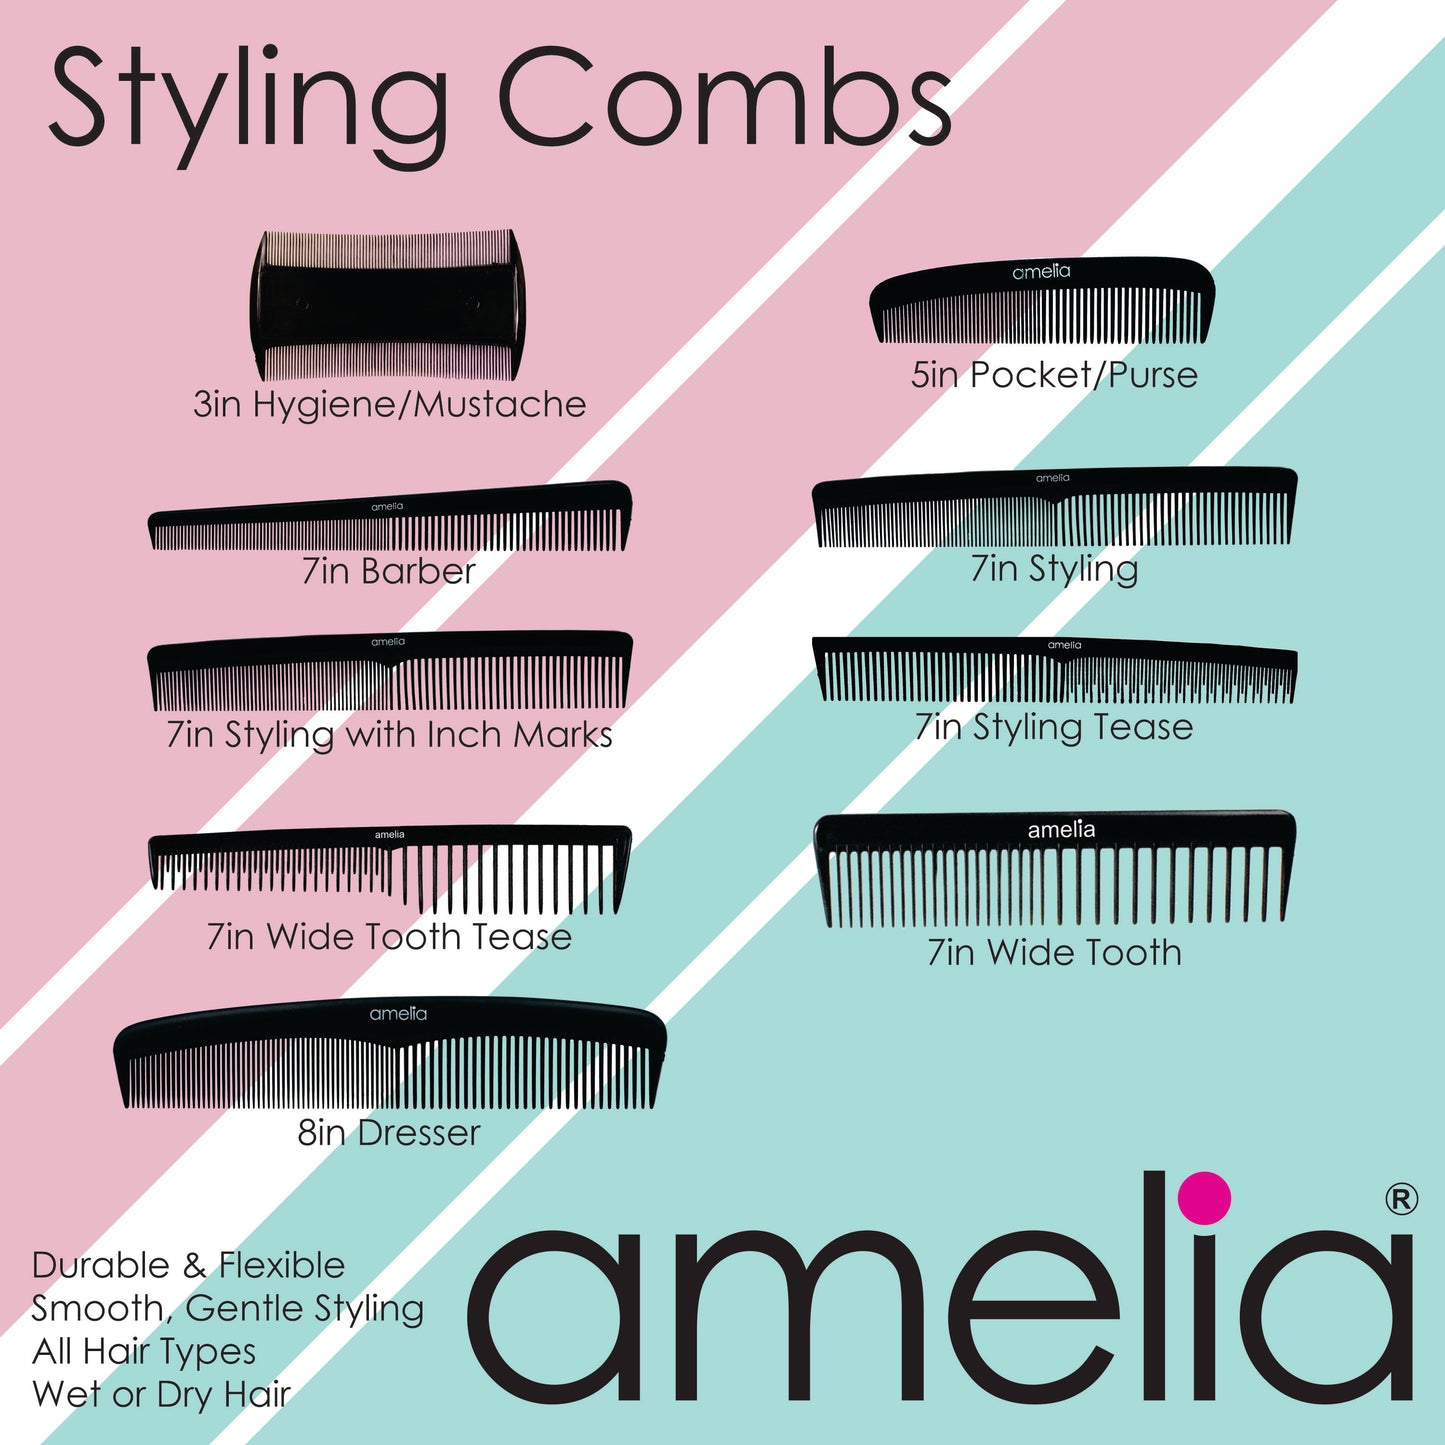 Amelia Beauty, 7in Black Plastic Styling Tease Comb with Inch Marks, Made in USA, Professional Grade Hair Comb, For Wet, Tangled Hair, Everyday Styling Cutting Hair Styling Tool, 2 Pack